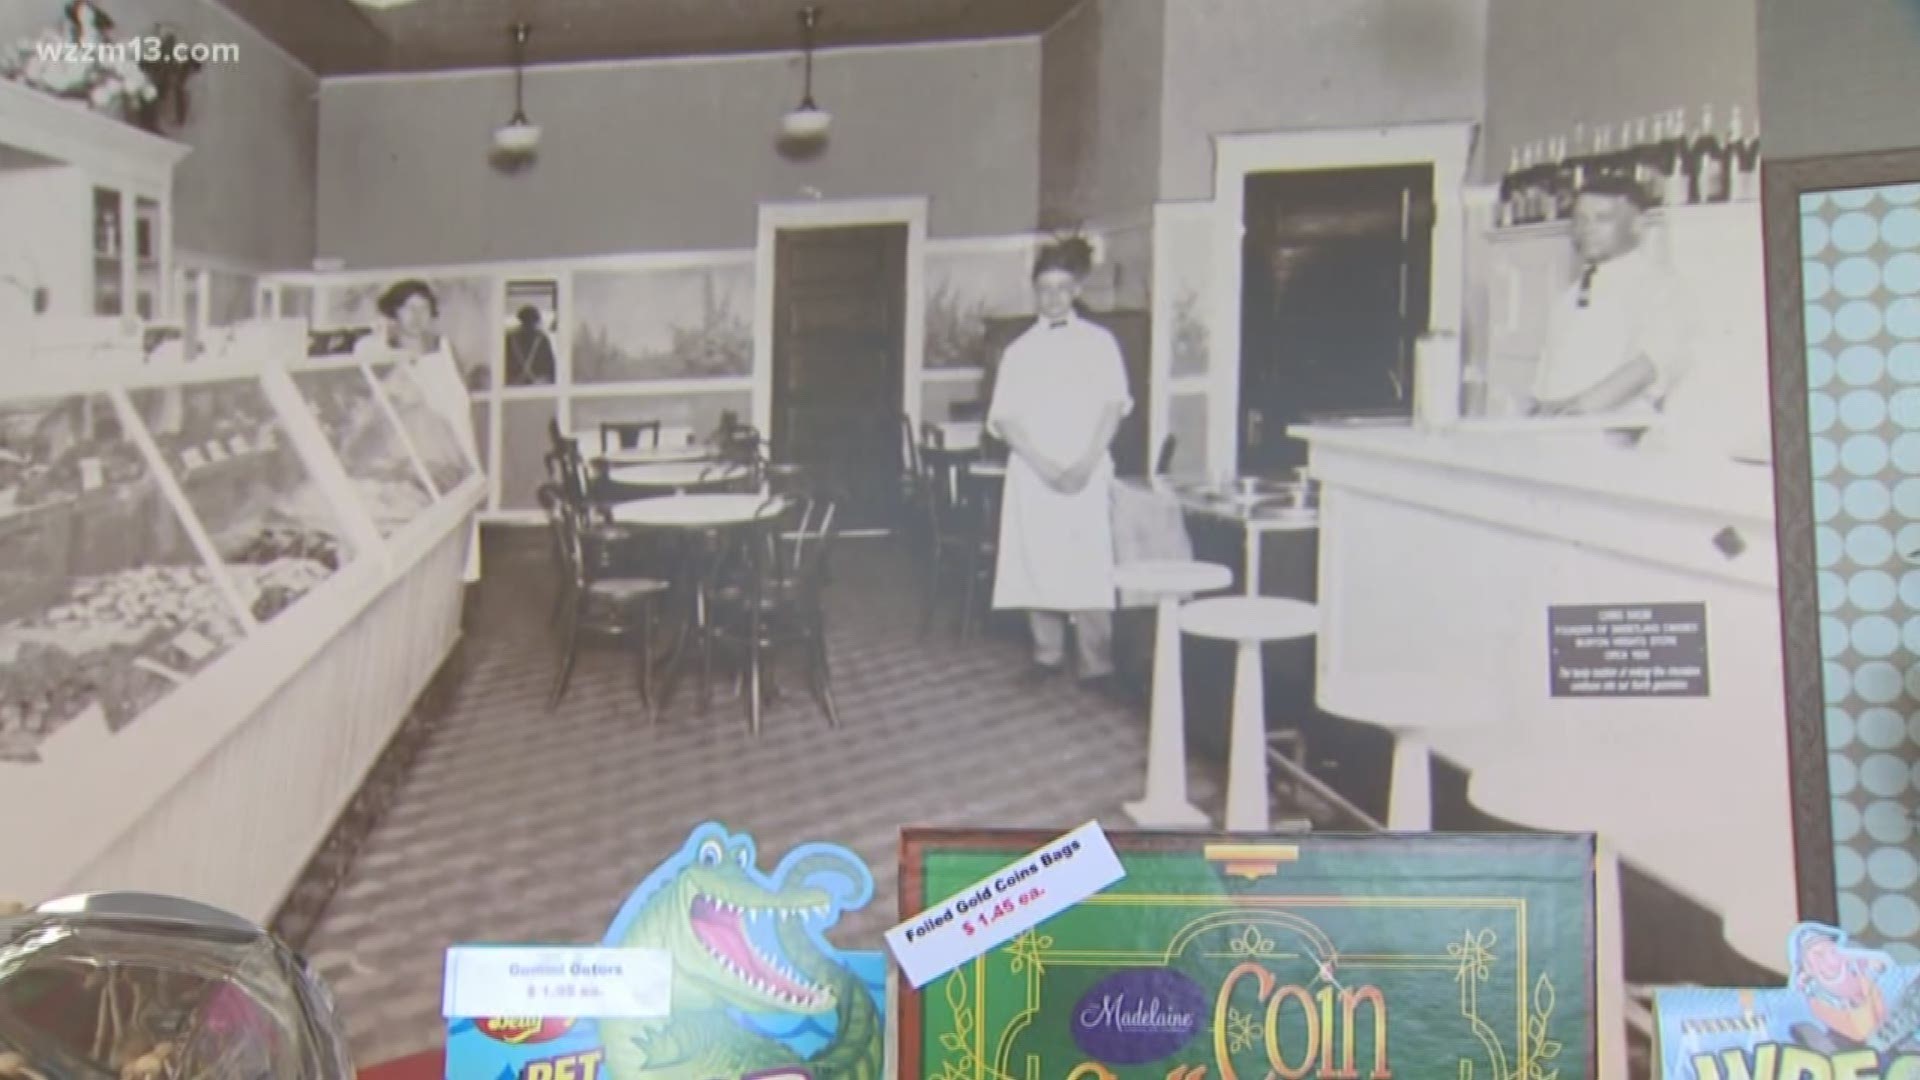 Sweetland Candies is one of West Michigan favorite and oldest businesses. Founded in 1919, the family business is celebrating its centennial anniversary this year.  To thank their customers for years of support Sweetland is holding a Customer Appreciation Day on May 31.